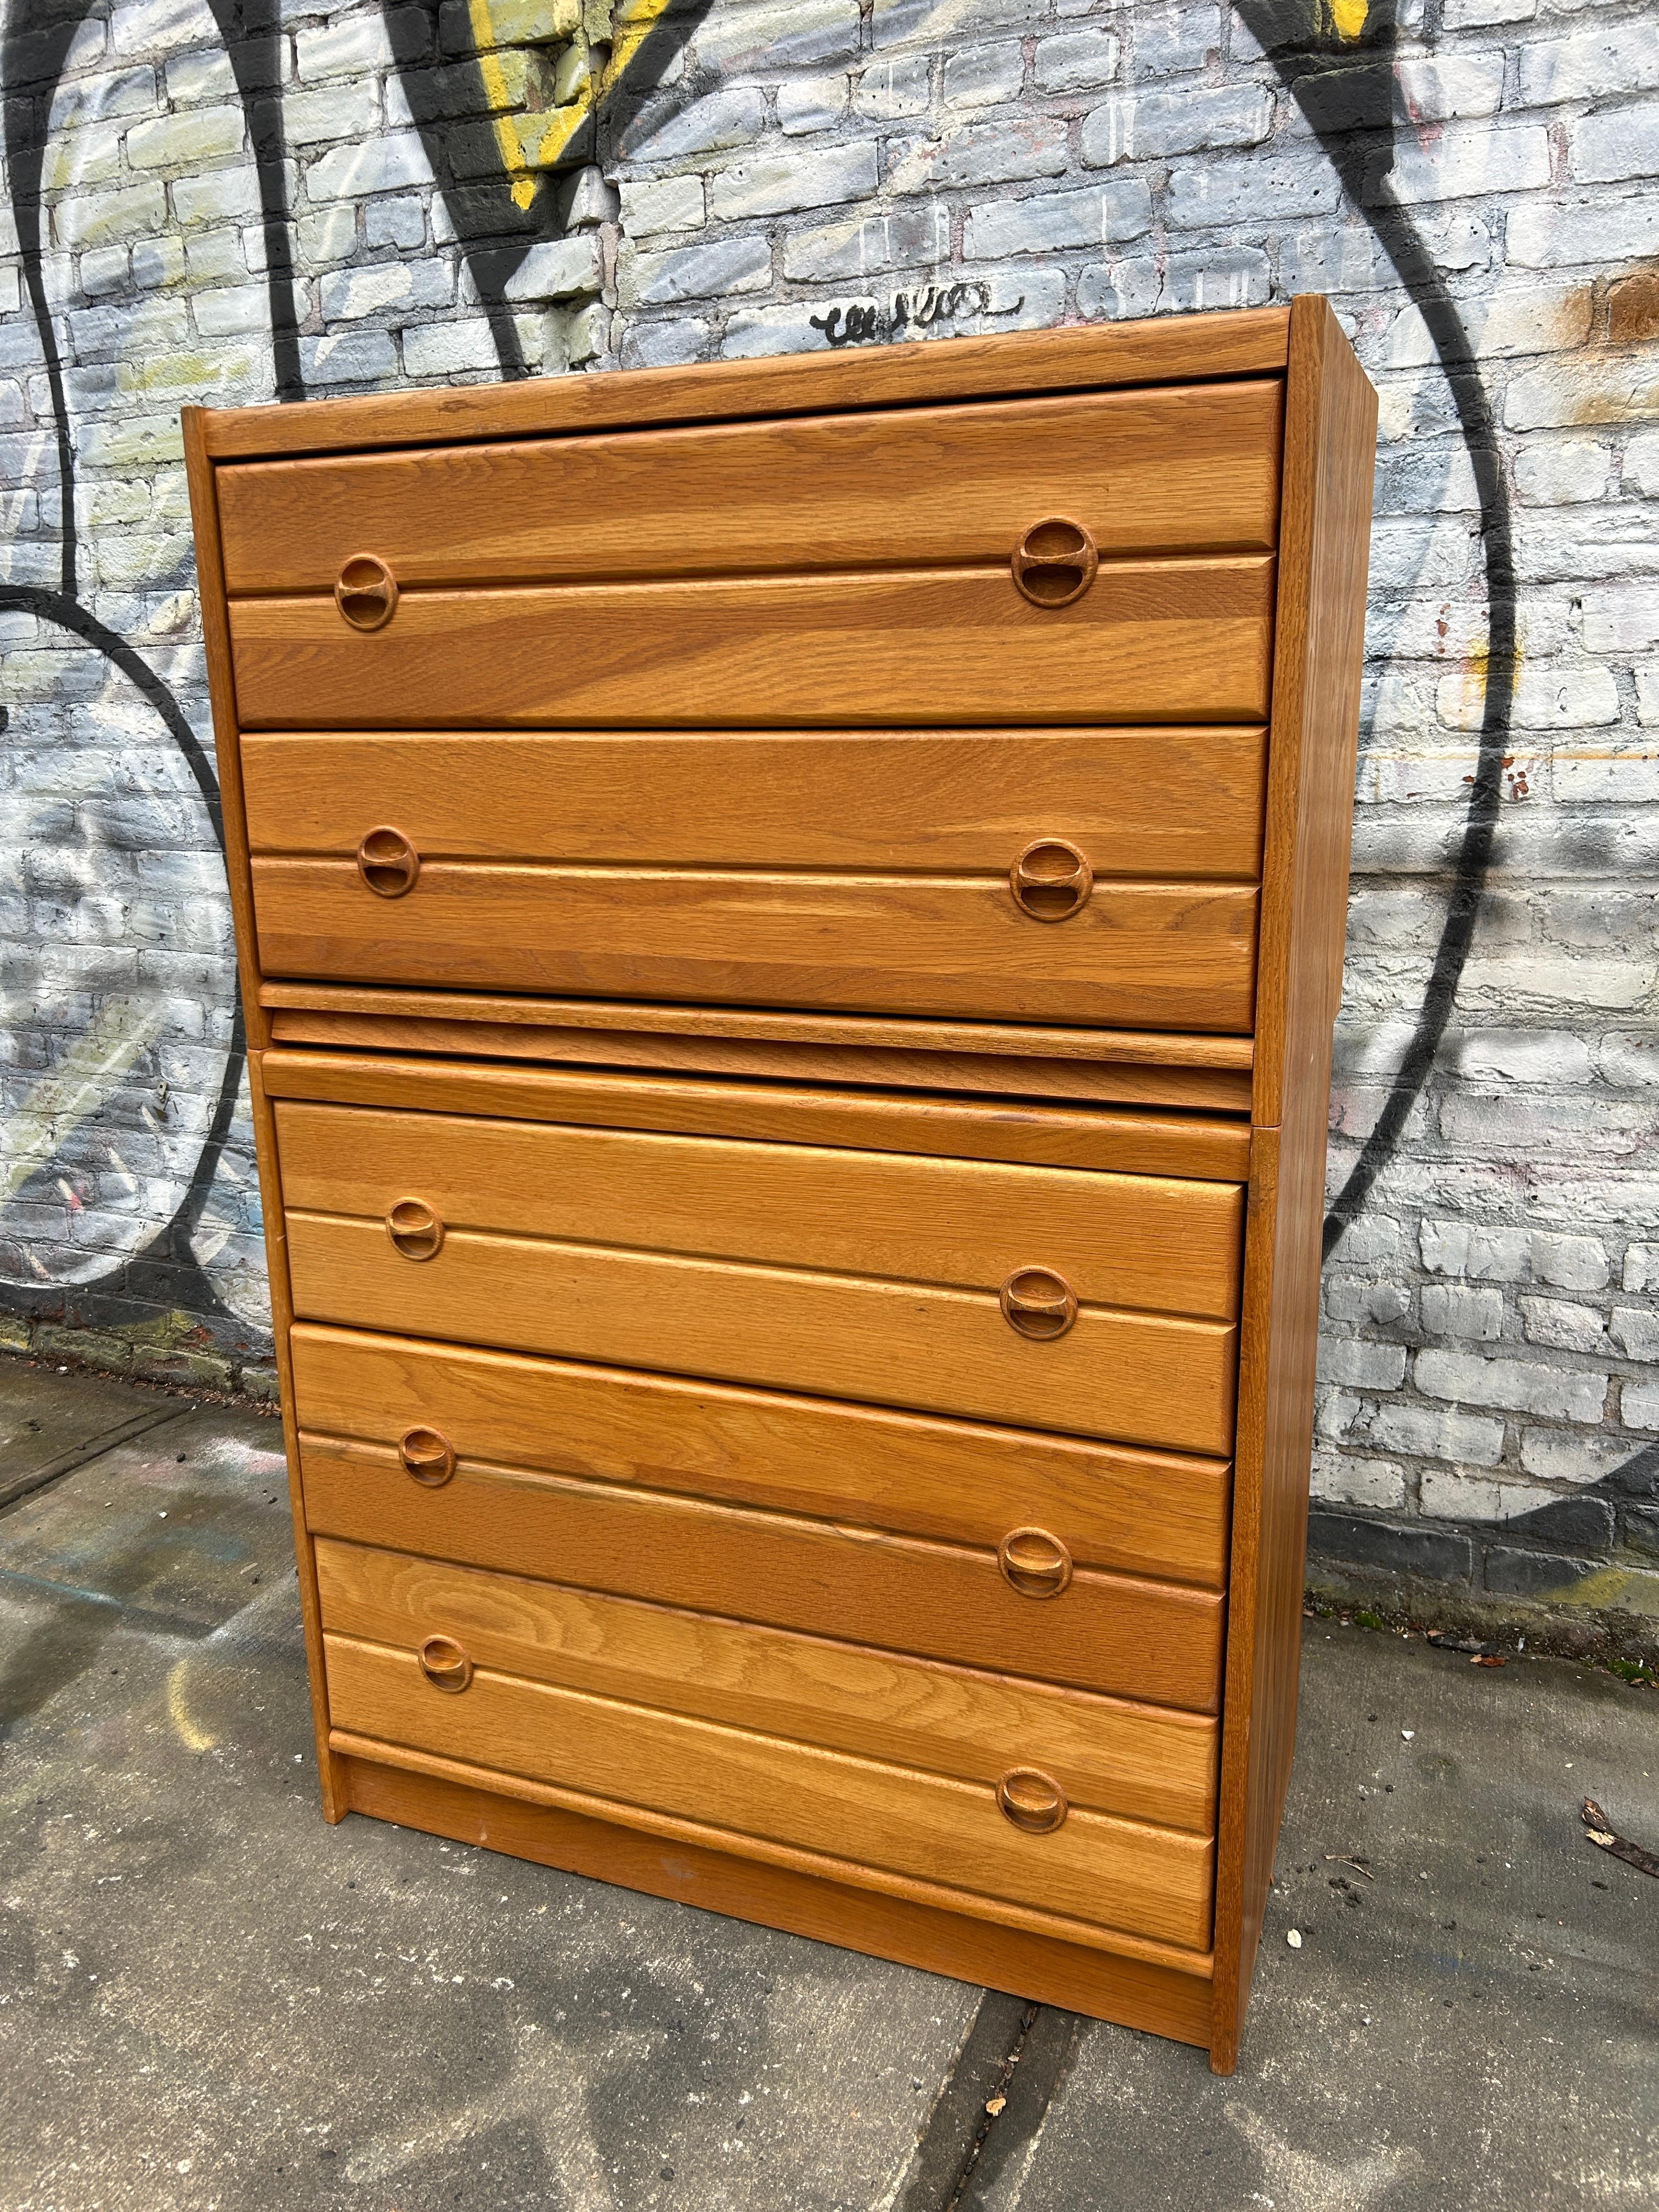 Beautiful tall mid century Danish modern Solid Oak five-drawer dresser. Great simple modular design and great vintage condition - clean inside and out. Drawers slide smooth on metal glides. Great light blonde oak wood grain with solid oak round